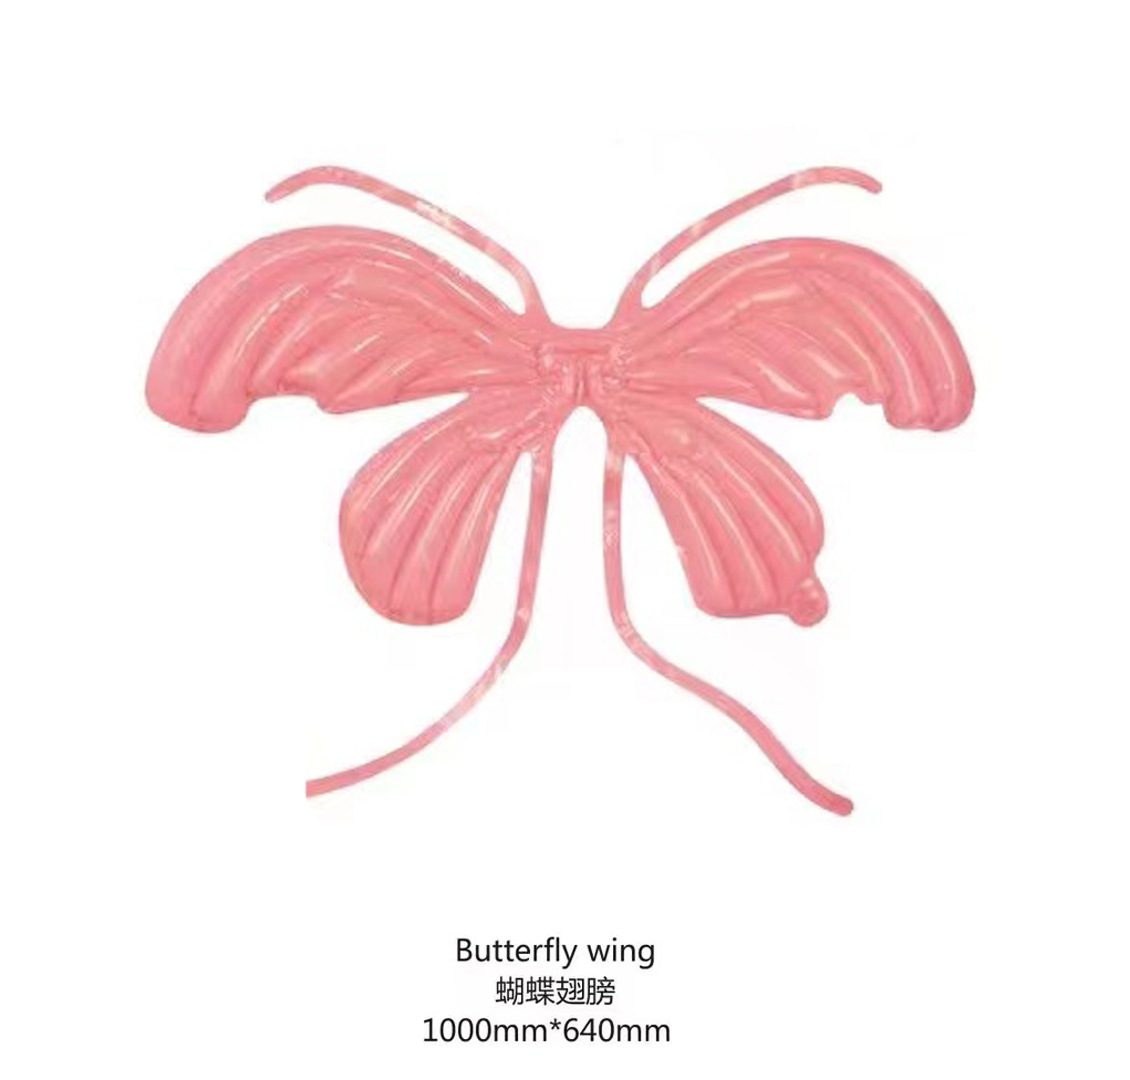 Internet Celebrity Angel Butterfly Wings Balloon Aluminum Film Mixed Batch Color Magic Color Inflatable Macaron Children Stall Wholesale